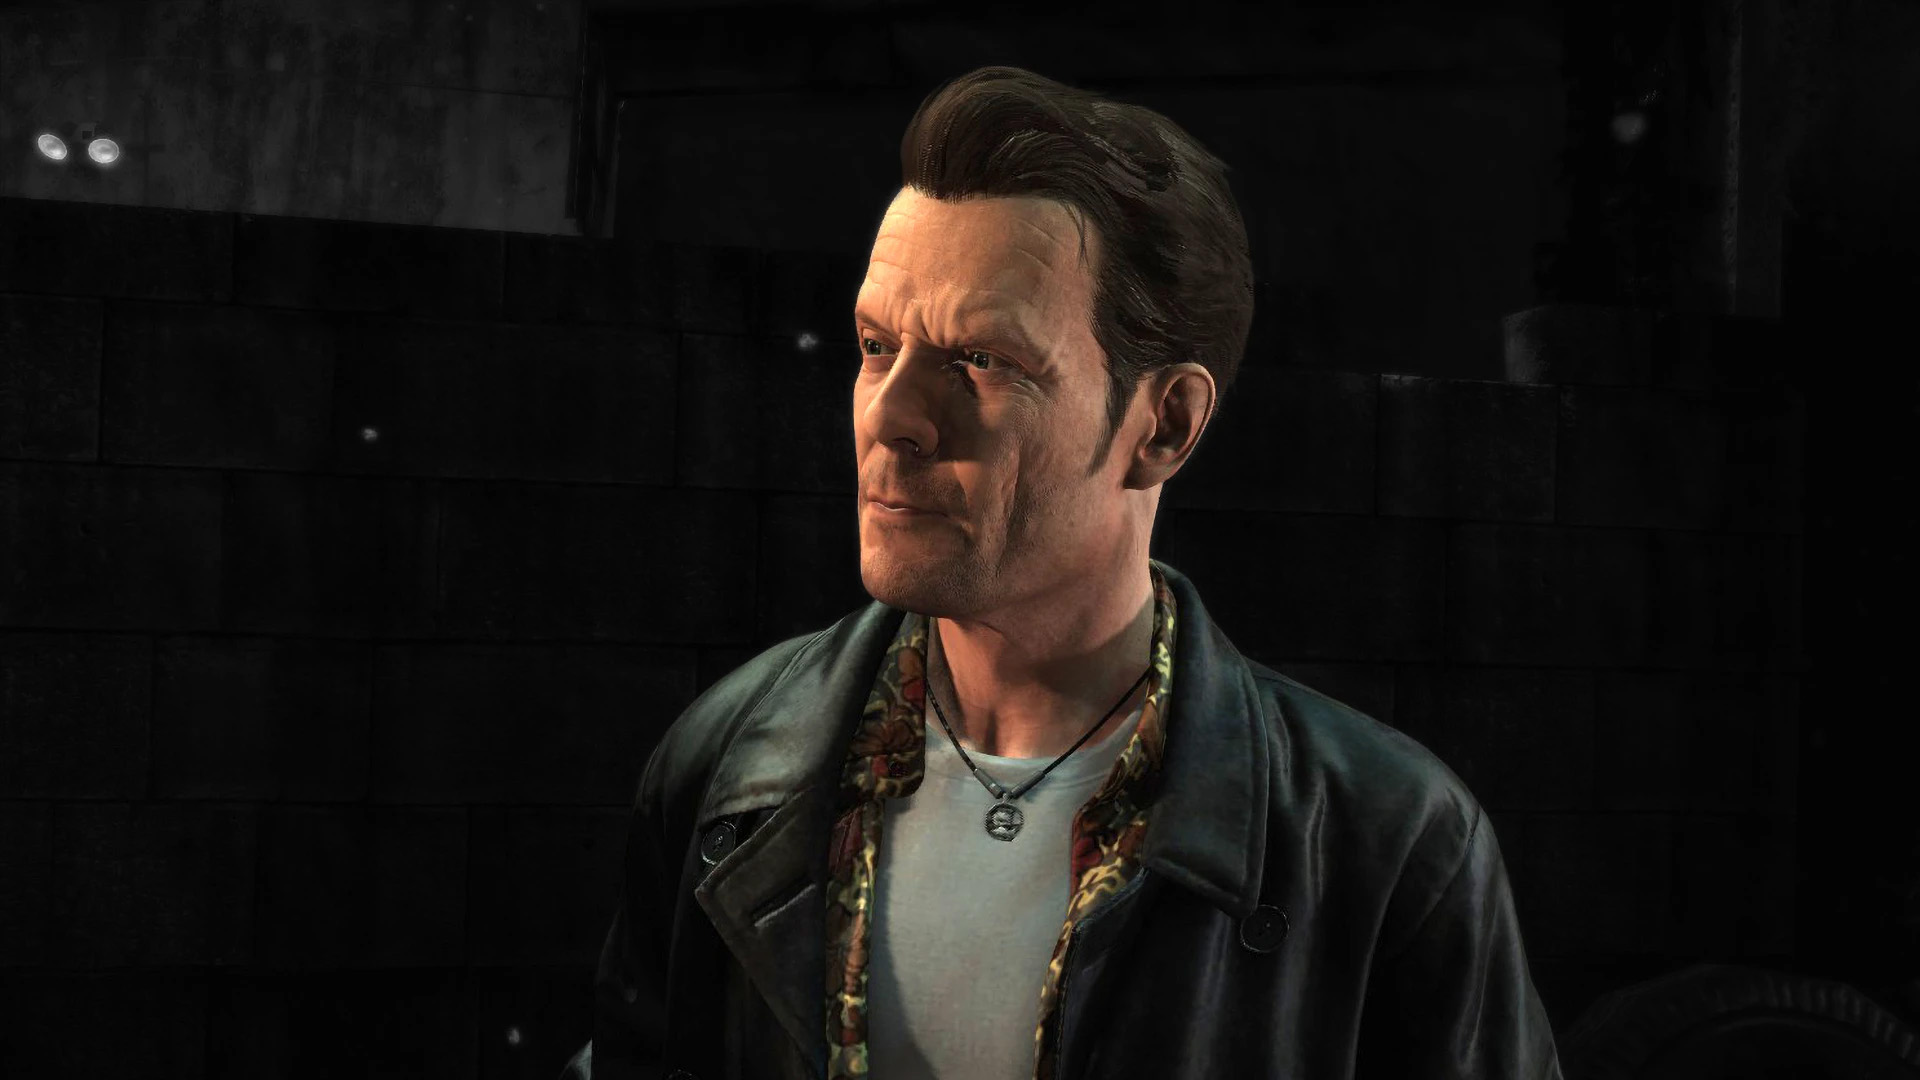 Max Payne and Max Payne 2 remakes announced for Xbox Series X